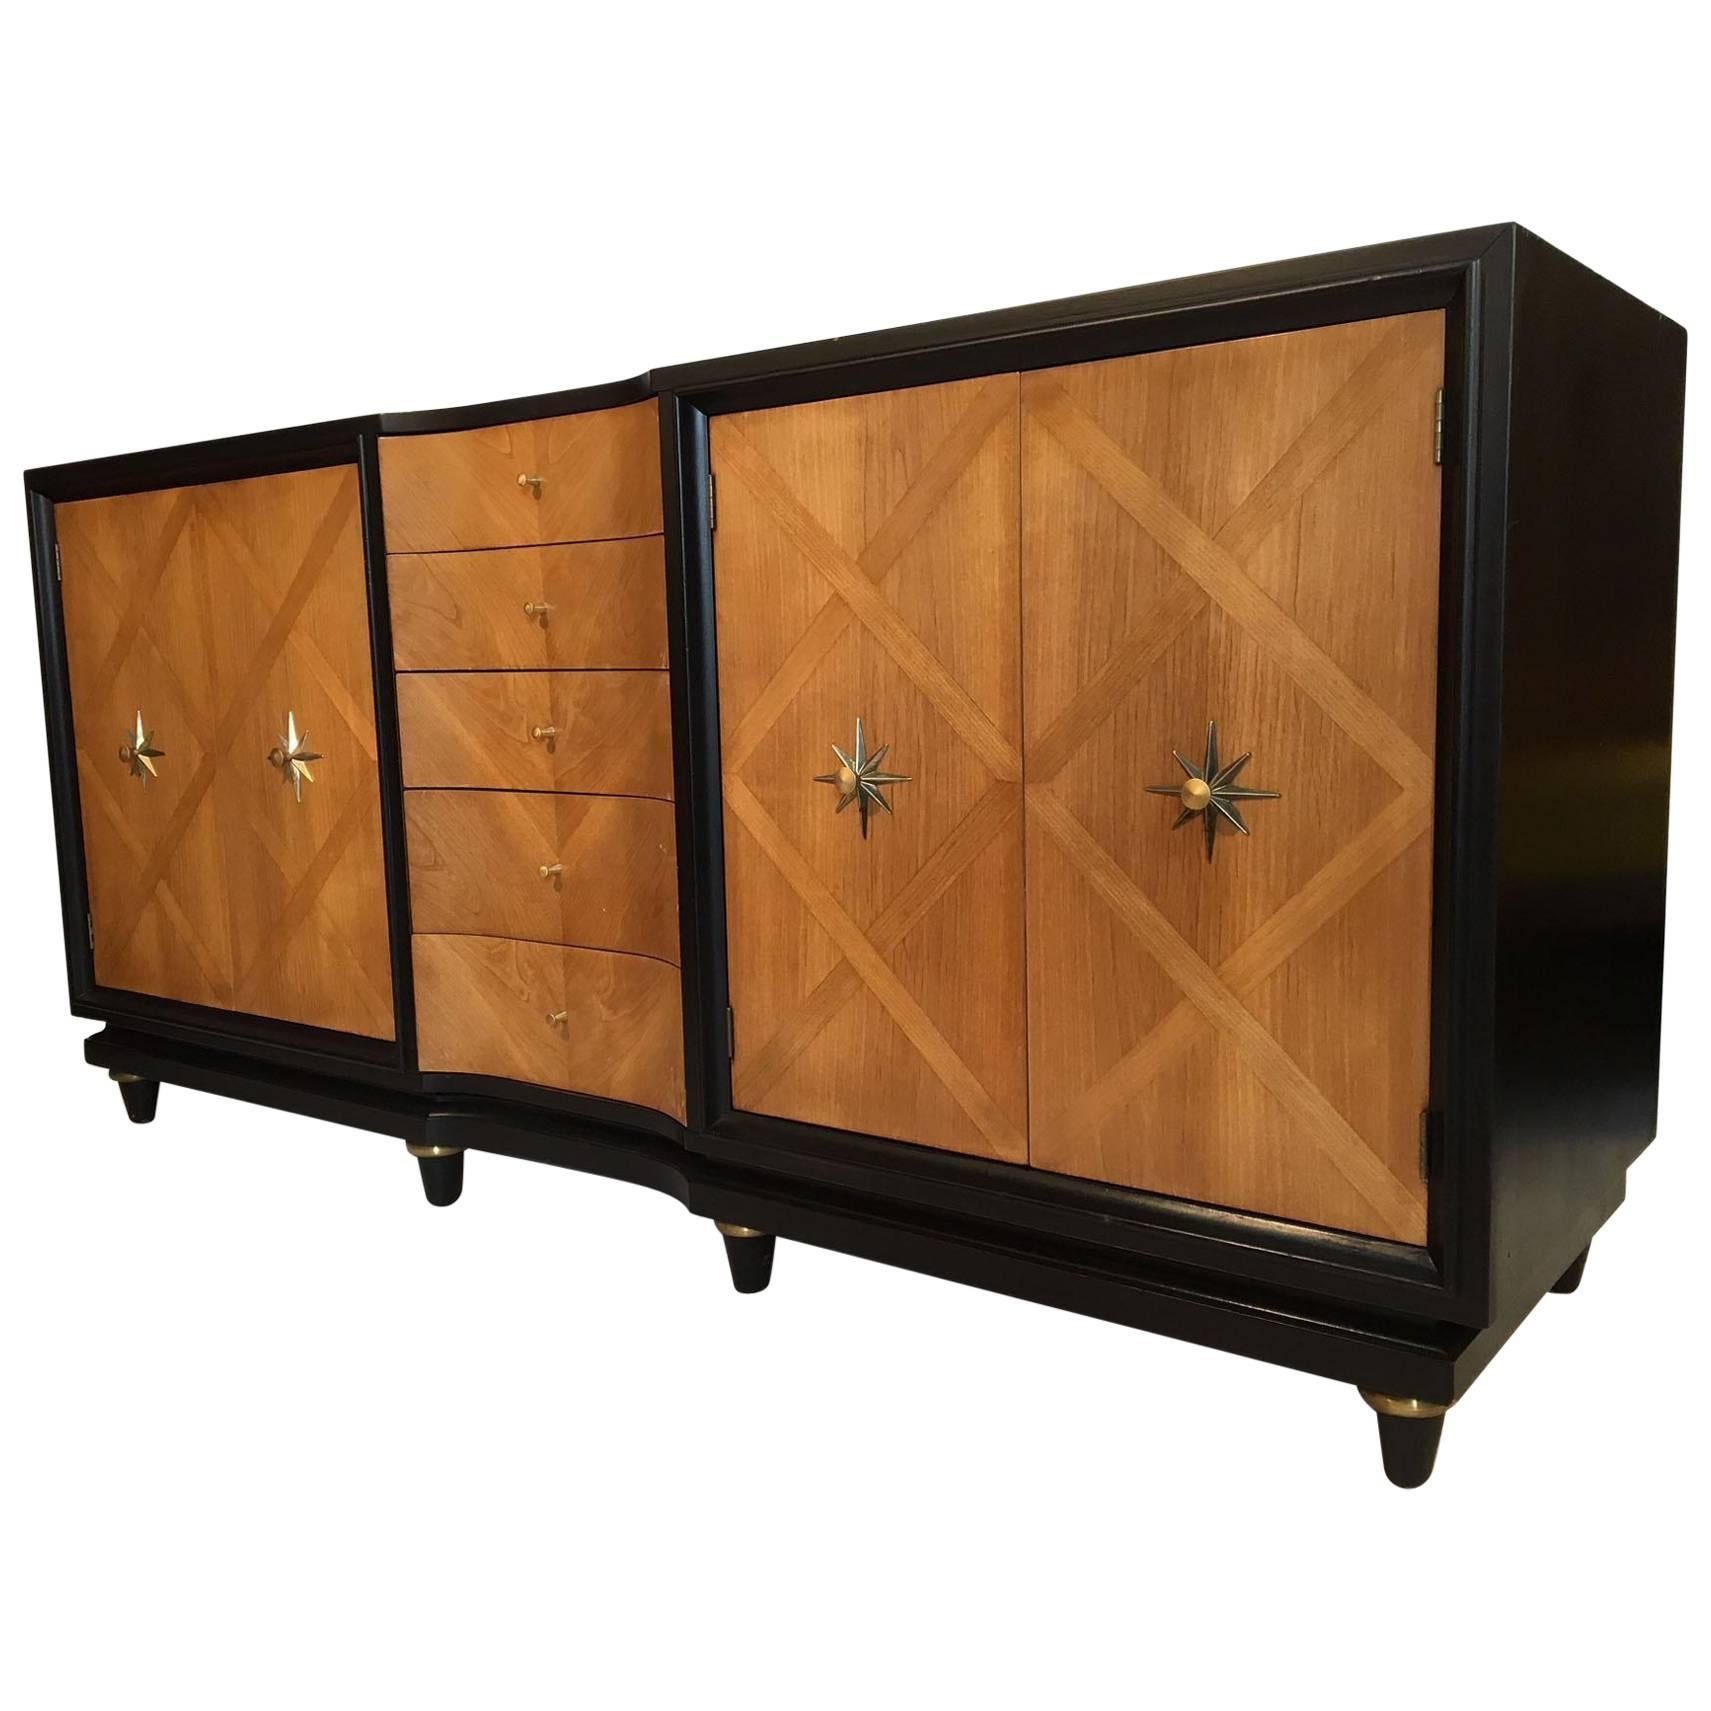 Art Deco Style Dresser by American of Martinsville